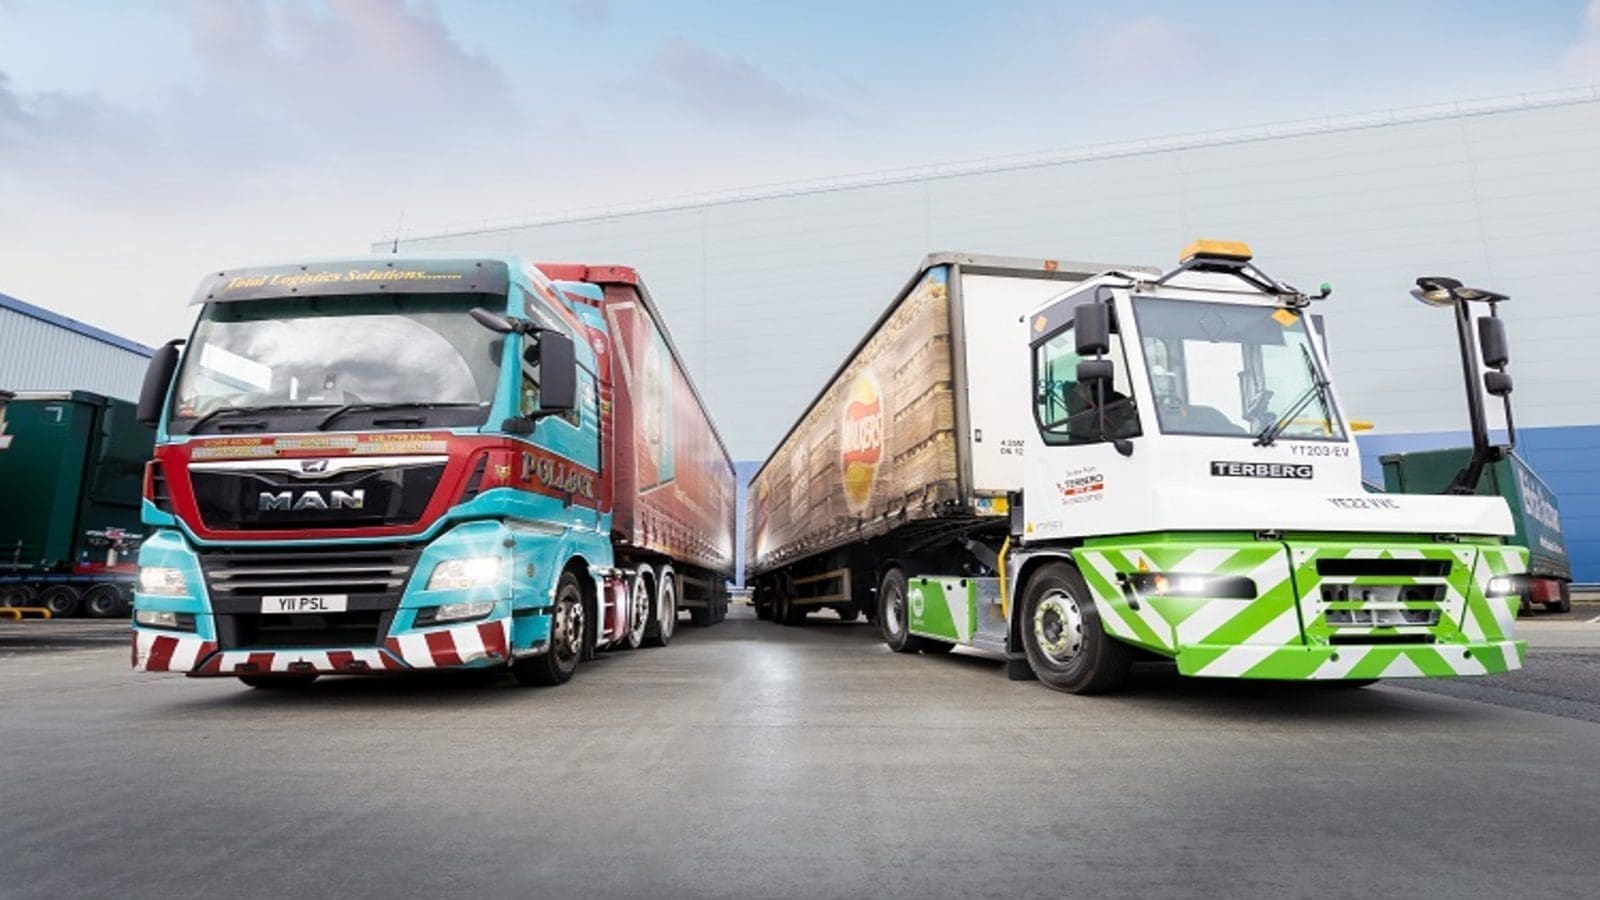 PepsiCo UK replaces diesel with recycled hydrogenated vegetable oil in transportation vehicles